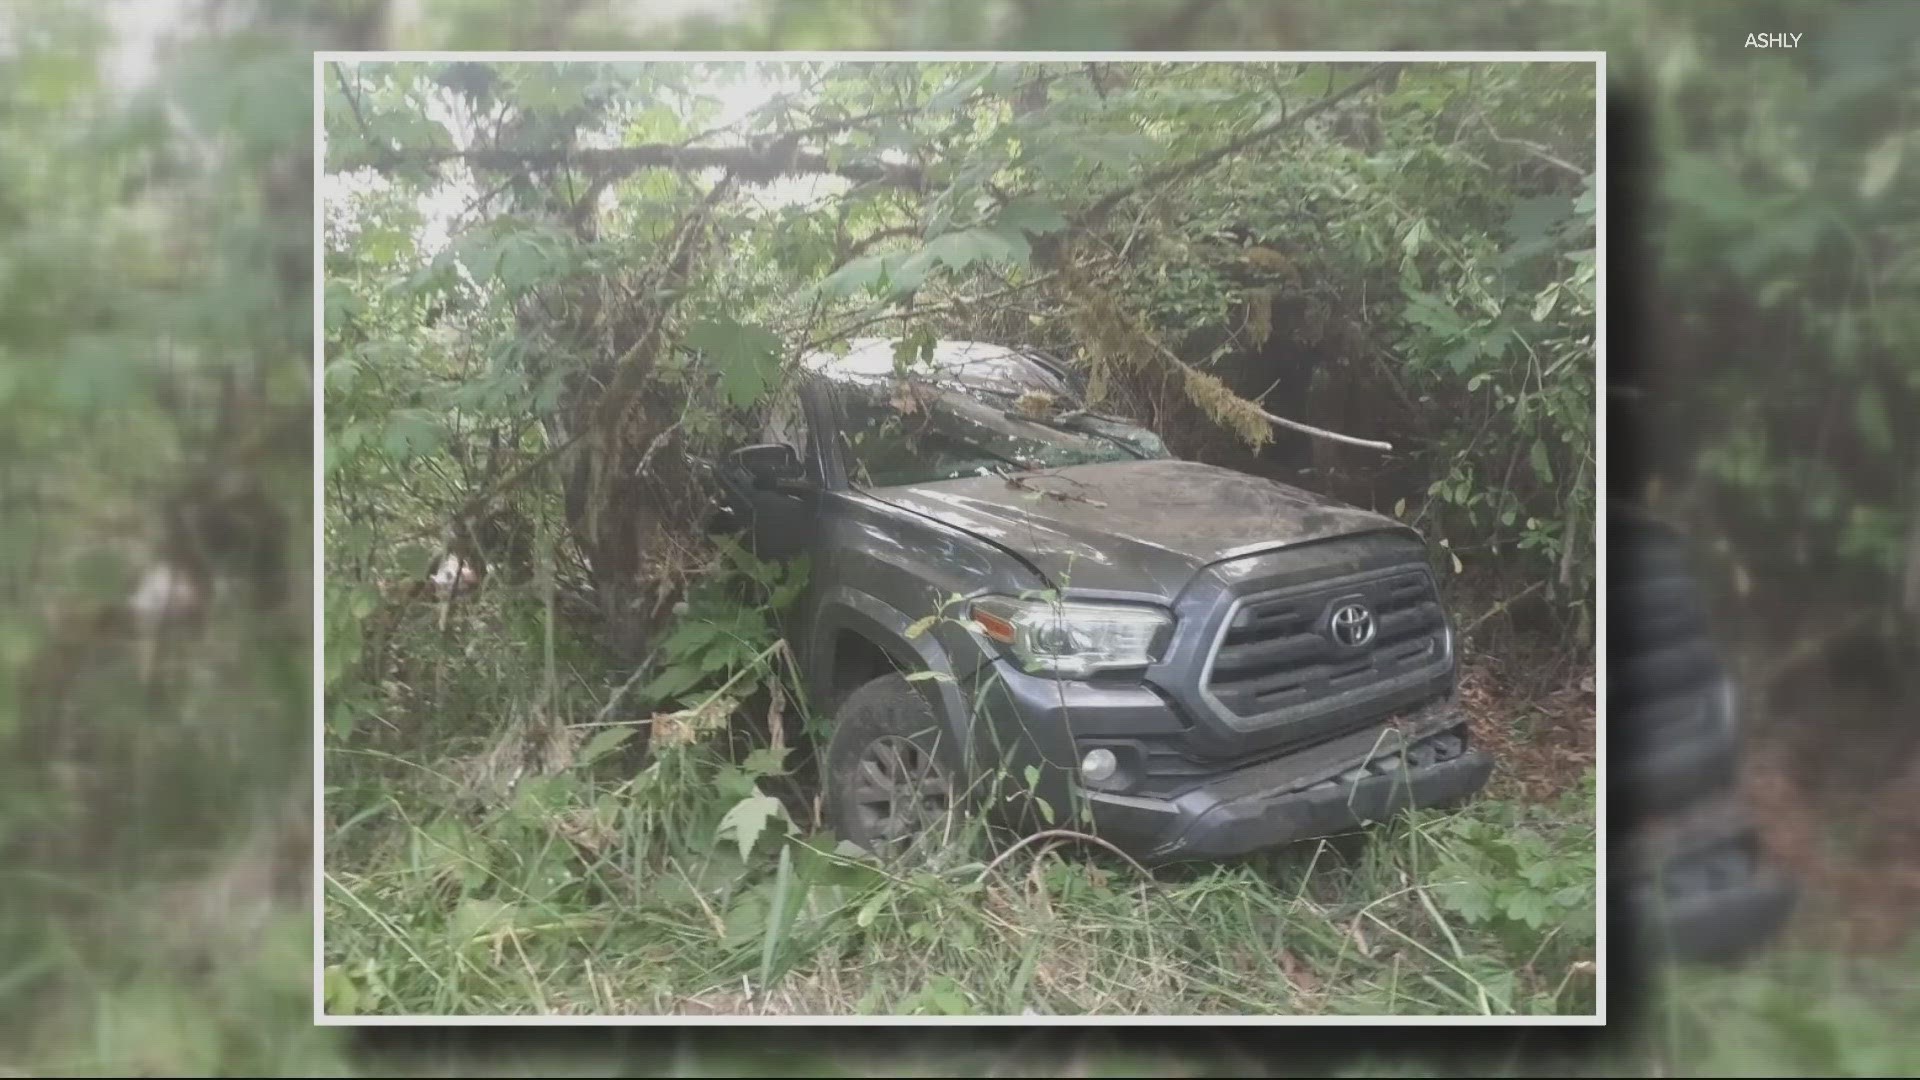 A woman in Vernonia was headed home Friday when her truck slide off the road.